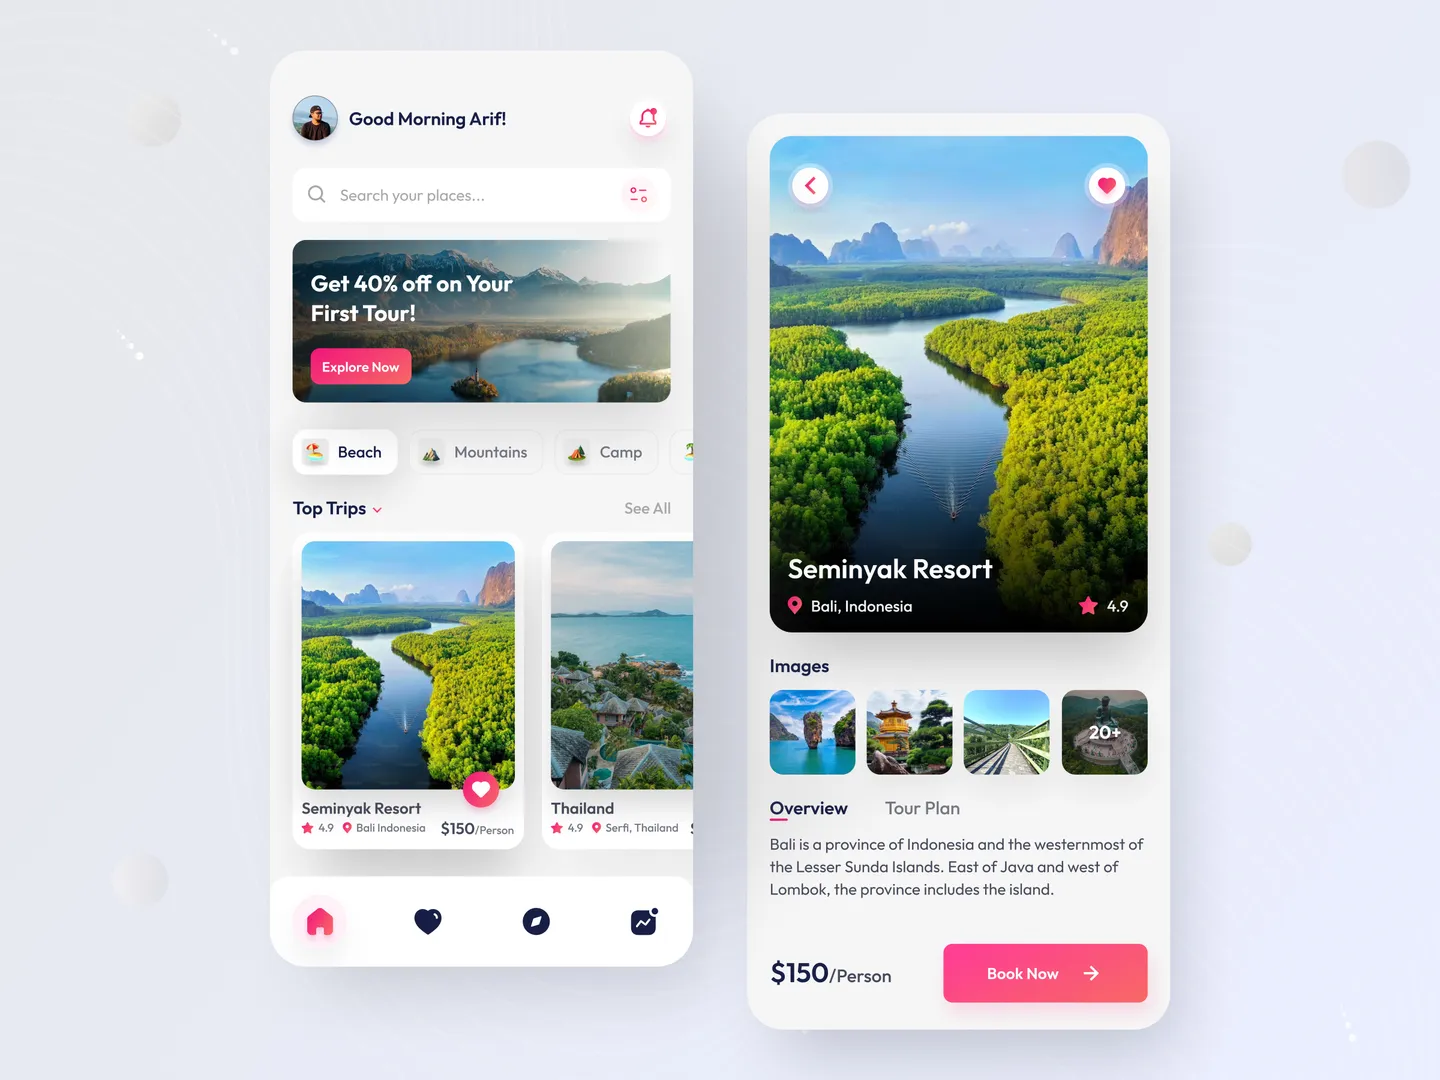 Hello folks!

Here is my recent exploration design for Travel App Concept.
The goal of the Travel App is to offer curated travel packages that encompass
destinations, accommodations, transportation and activities. This app will provide users with hassle-free and comprehensive vacation experience.